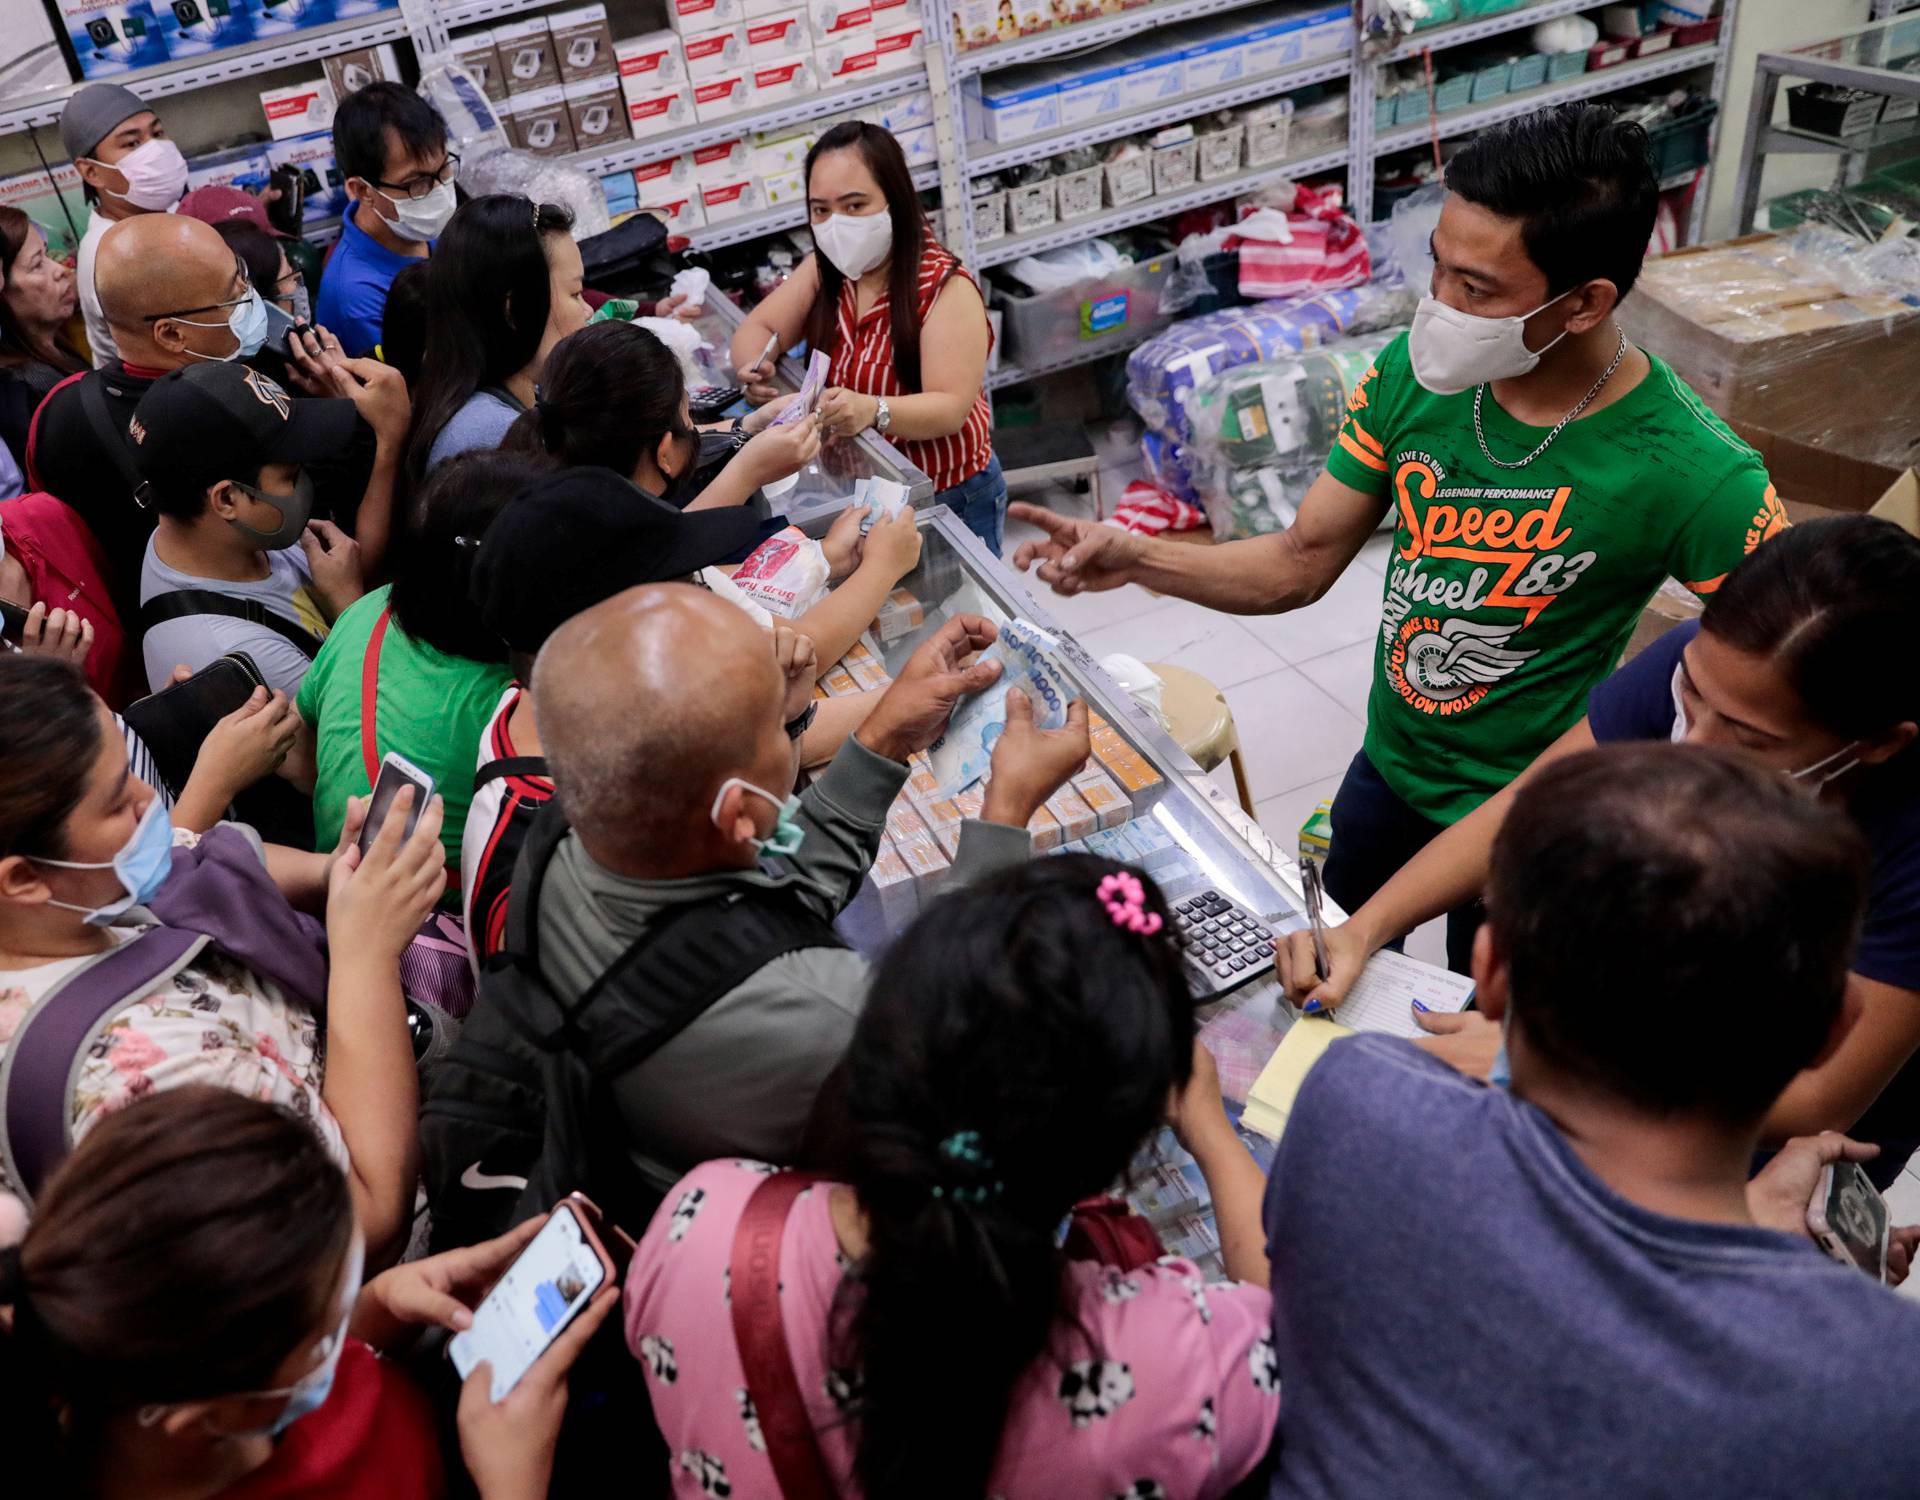 People scramble to buy face masks in a medical supply store a day after Philippine government confirmed first novel coronavirus case